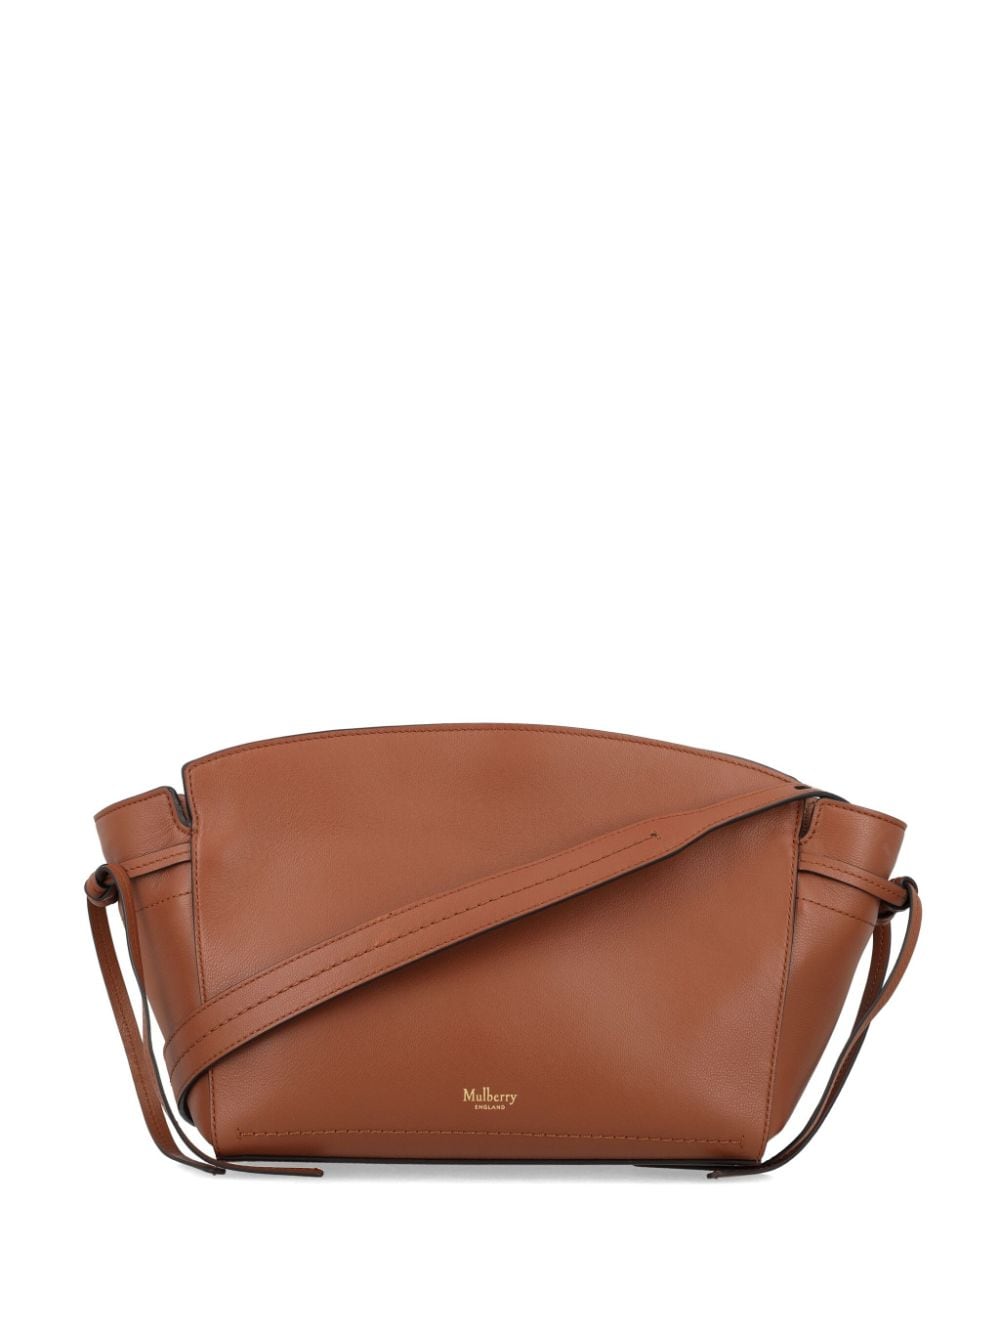 Mulberry Clovelly leather crossbody bag - Brown von Mulberry